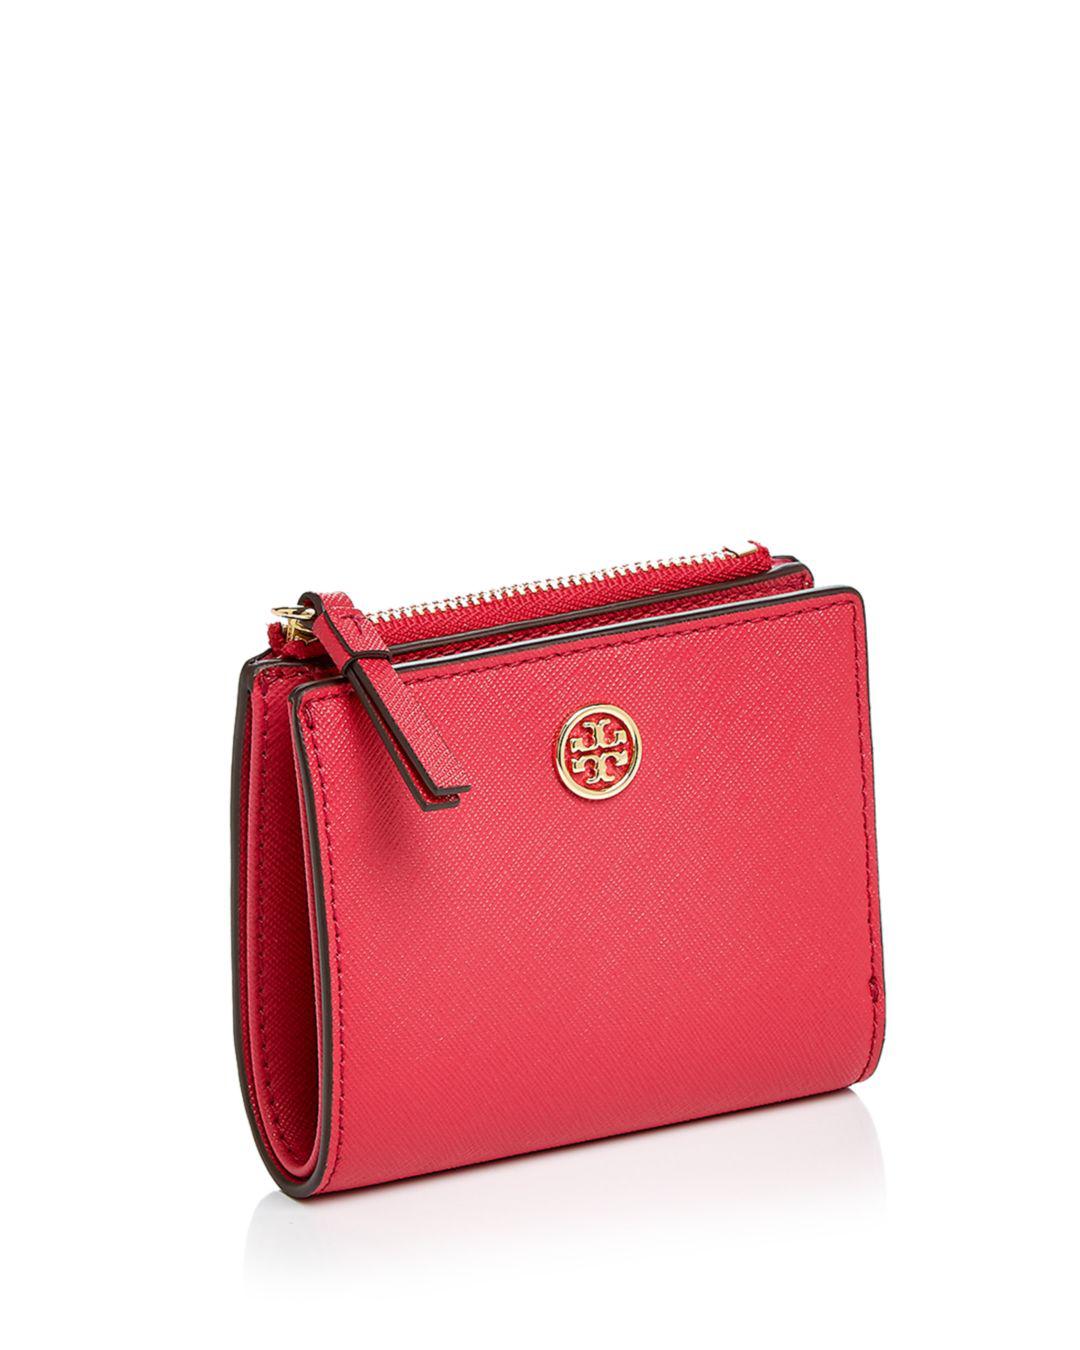 Tory Burch Robinson Small Leather Wallet - Lyst